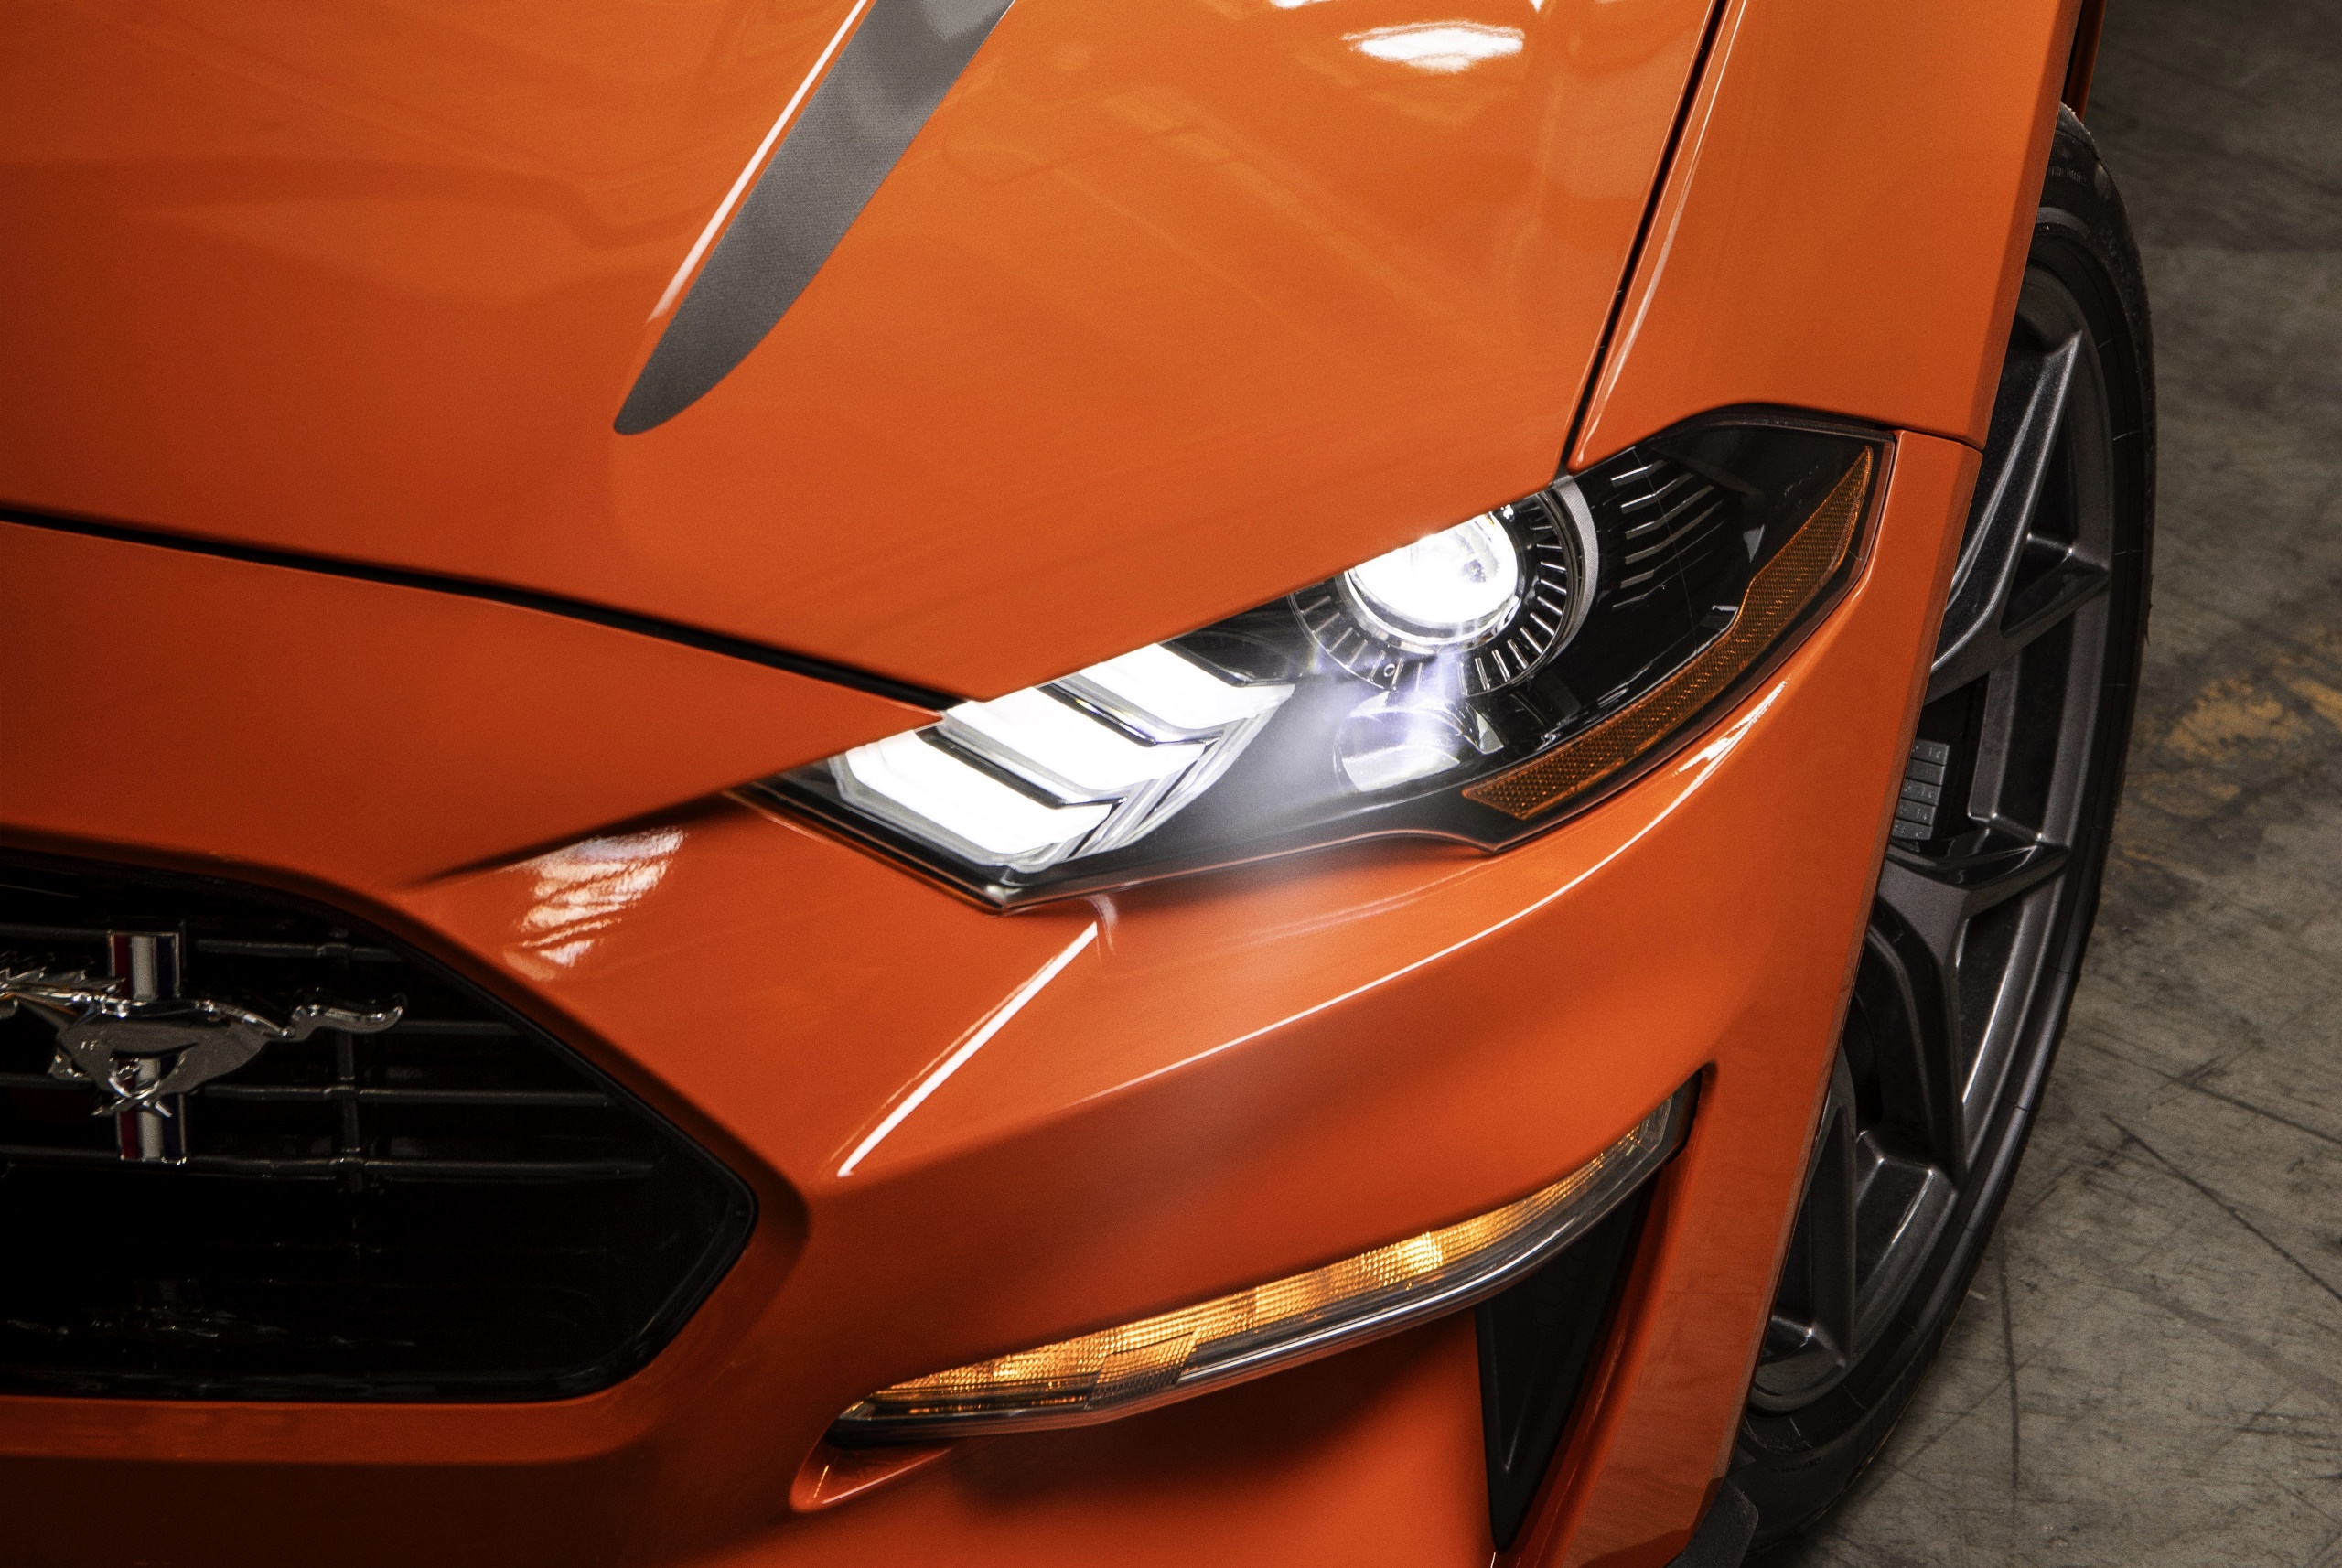 General 2560x1714 car vehicle Ford Ford Mustang closeup orange cars Ford Mustang S550 headlights